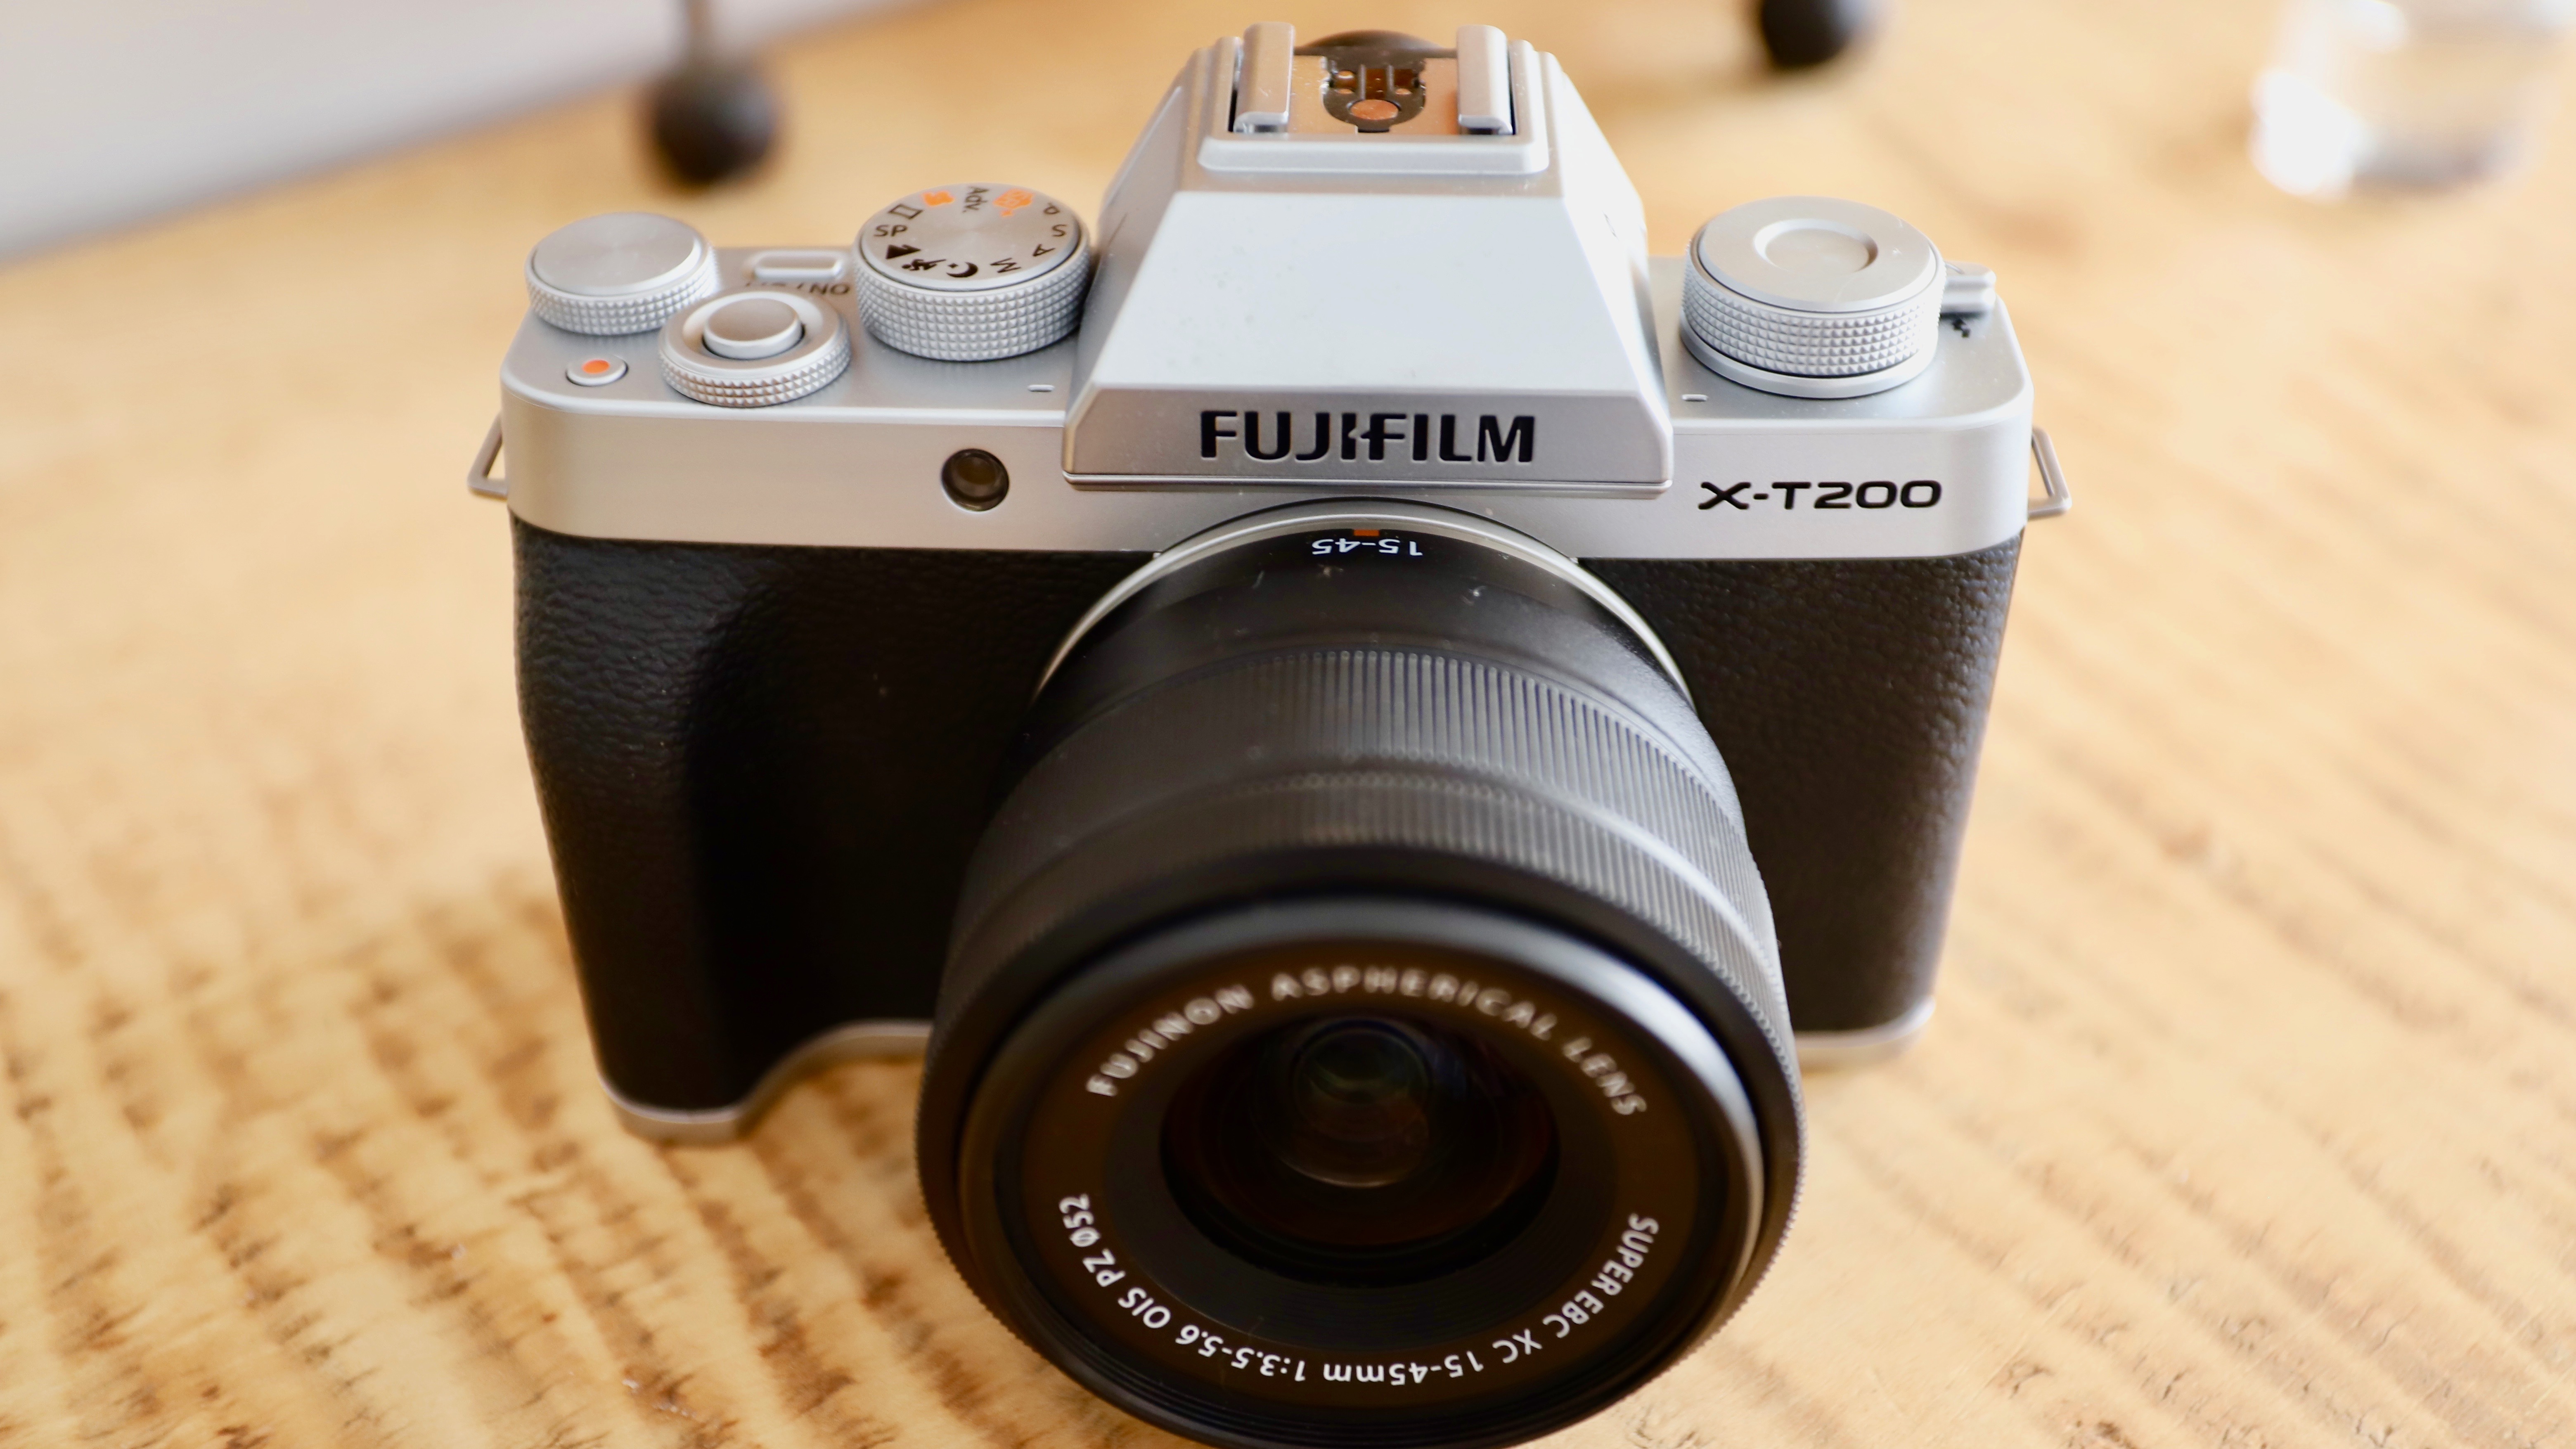 The Fujifilm X-T200 sitting on a wooden table with its 18-55mm kit lens